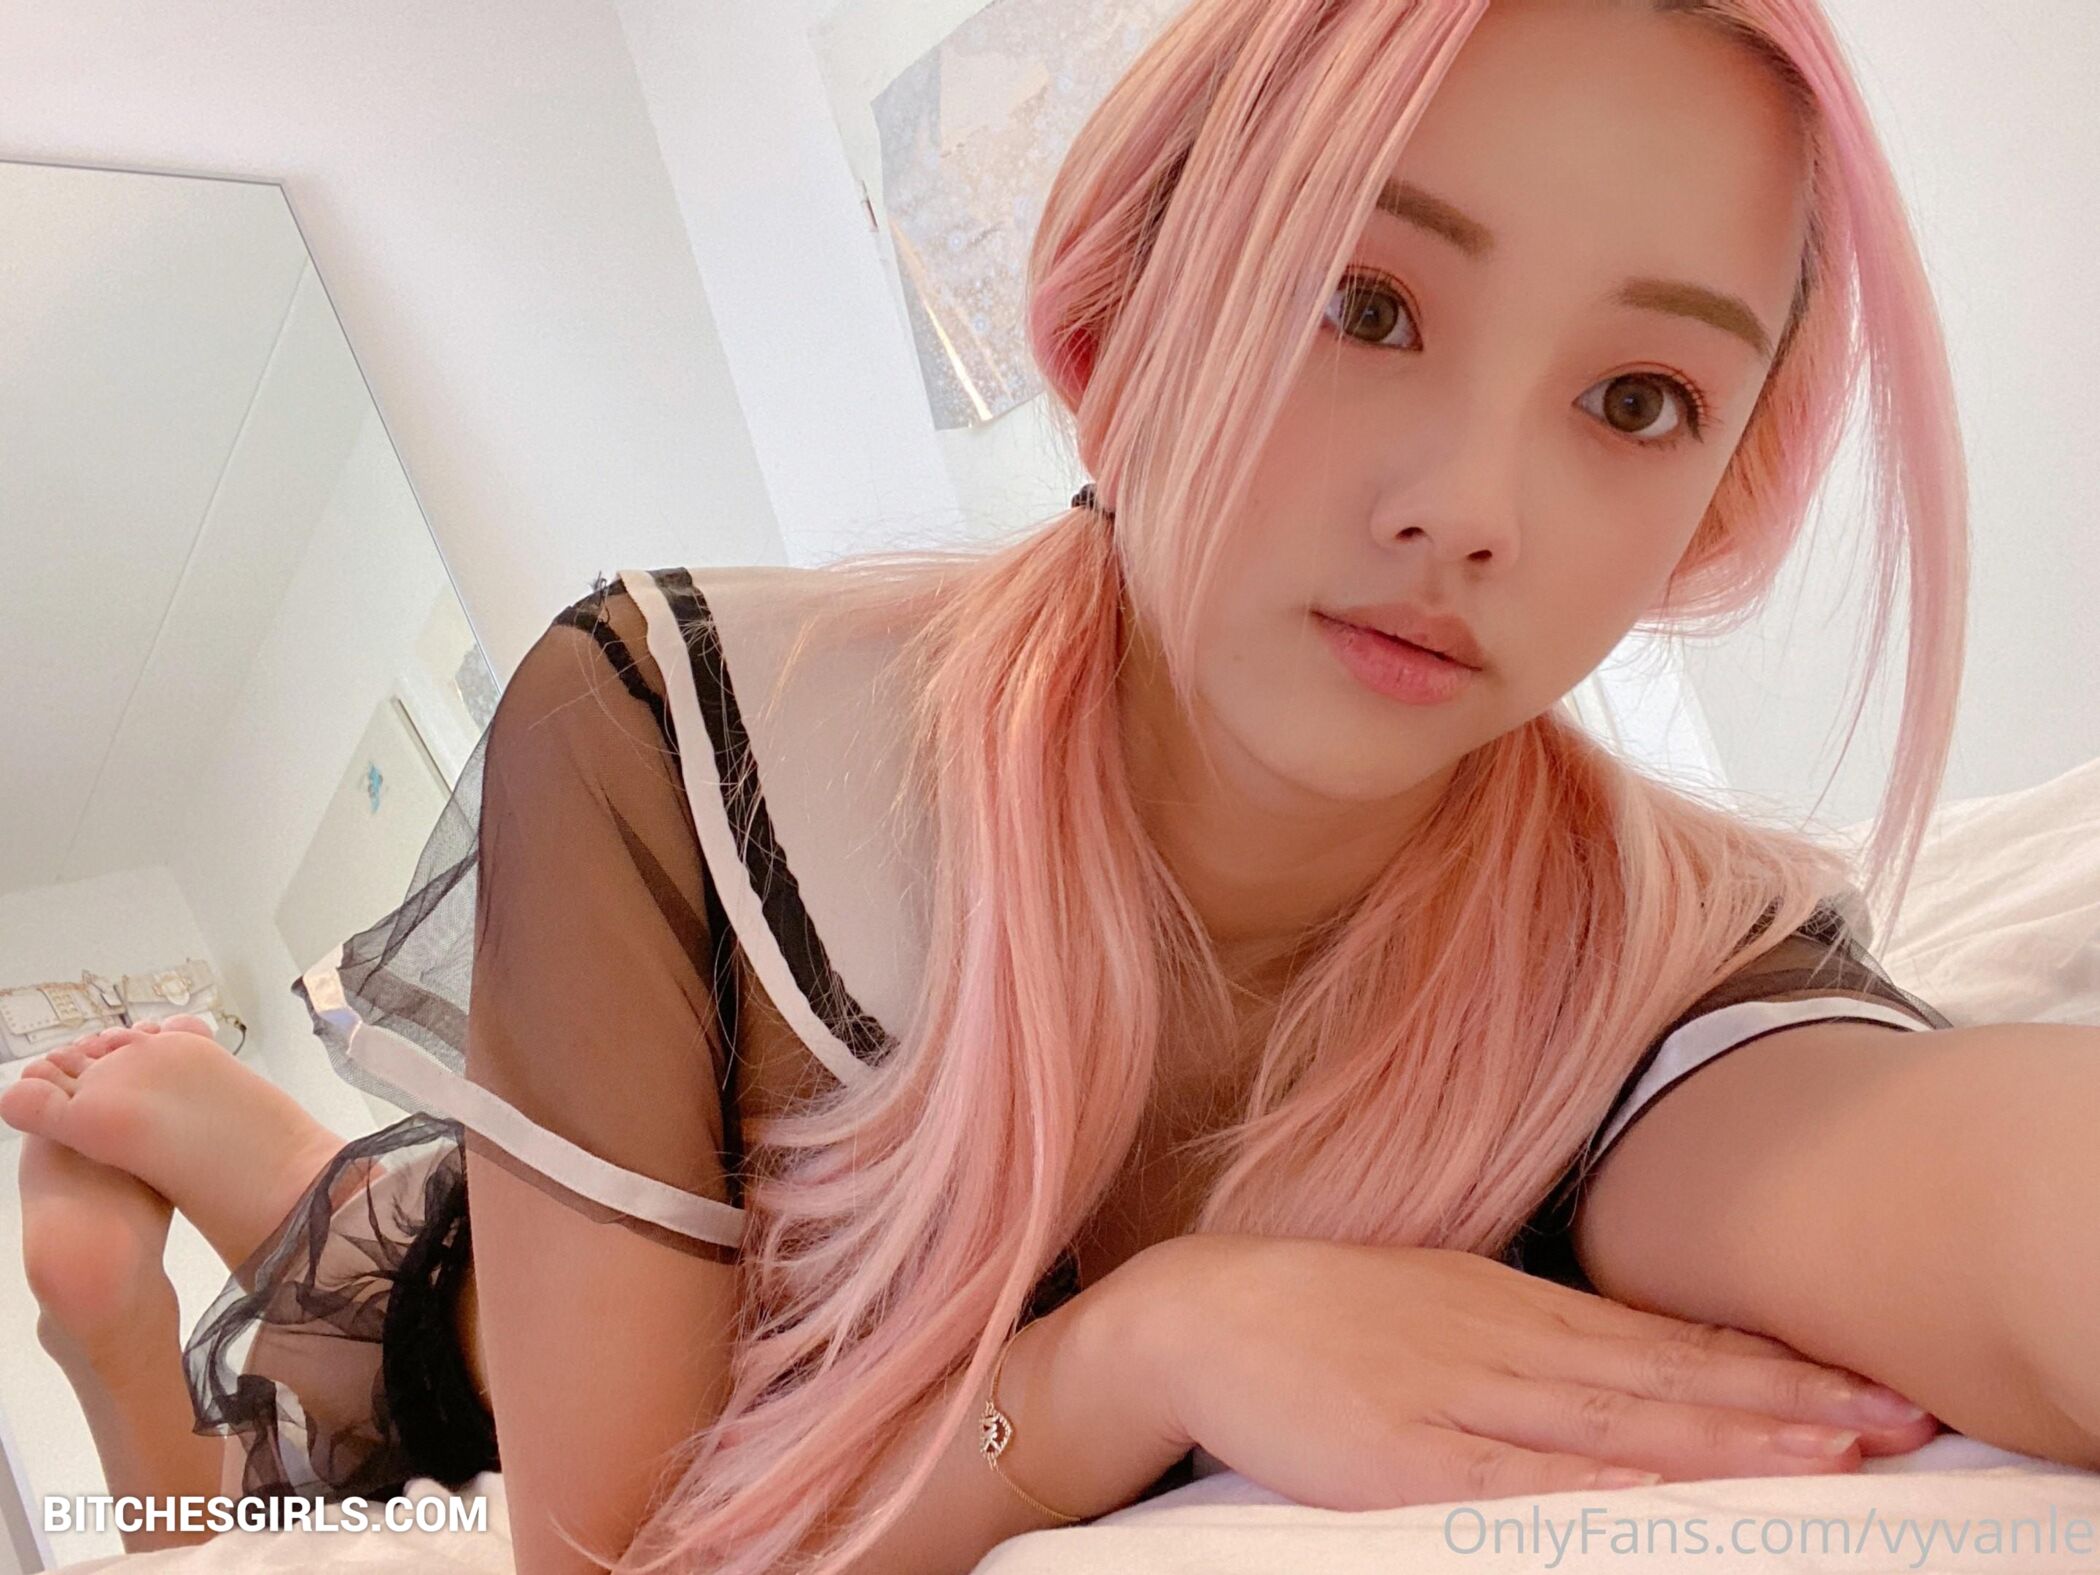 Check out the latest scandal involving influencer Vyvan Le and her leaked OnlyFans content. Witness her baring it all in a steamy bikini gallery, as well as explicit nudes that have surfaced online. The wild side of Thot Le is on full display, with adult videos and leaked photos that can't be found on Reddit. Discover the real name and age of this provocative influencer at leakwiki. Don't miss out on this exclusive peek into the world of Vyvan Le.